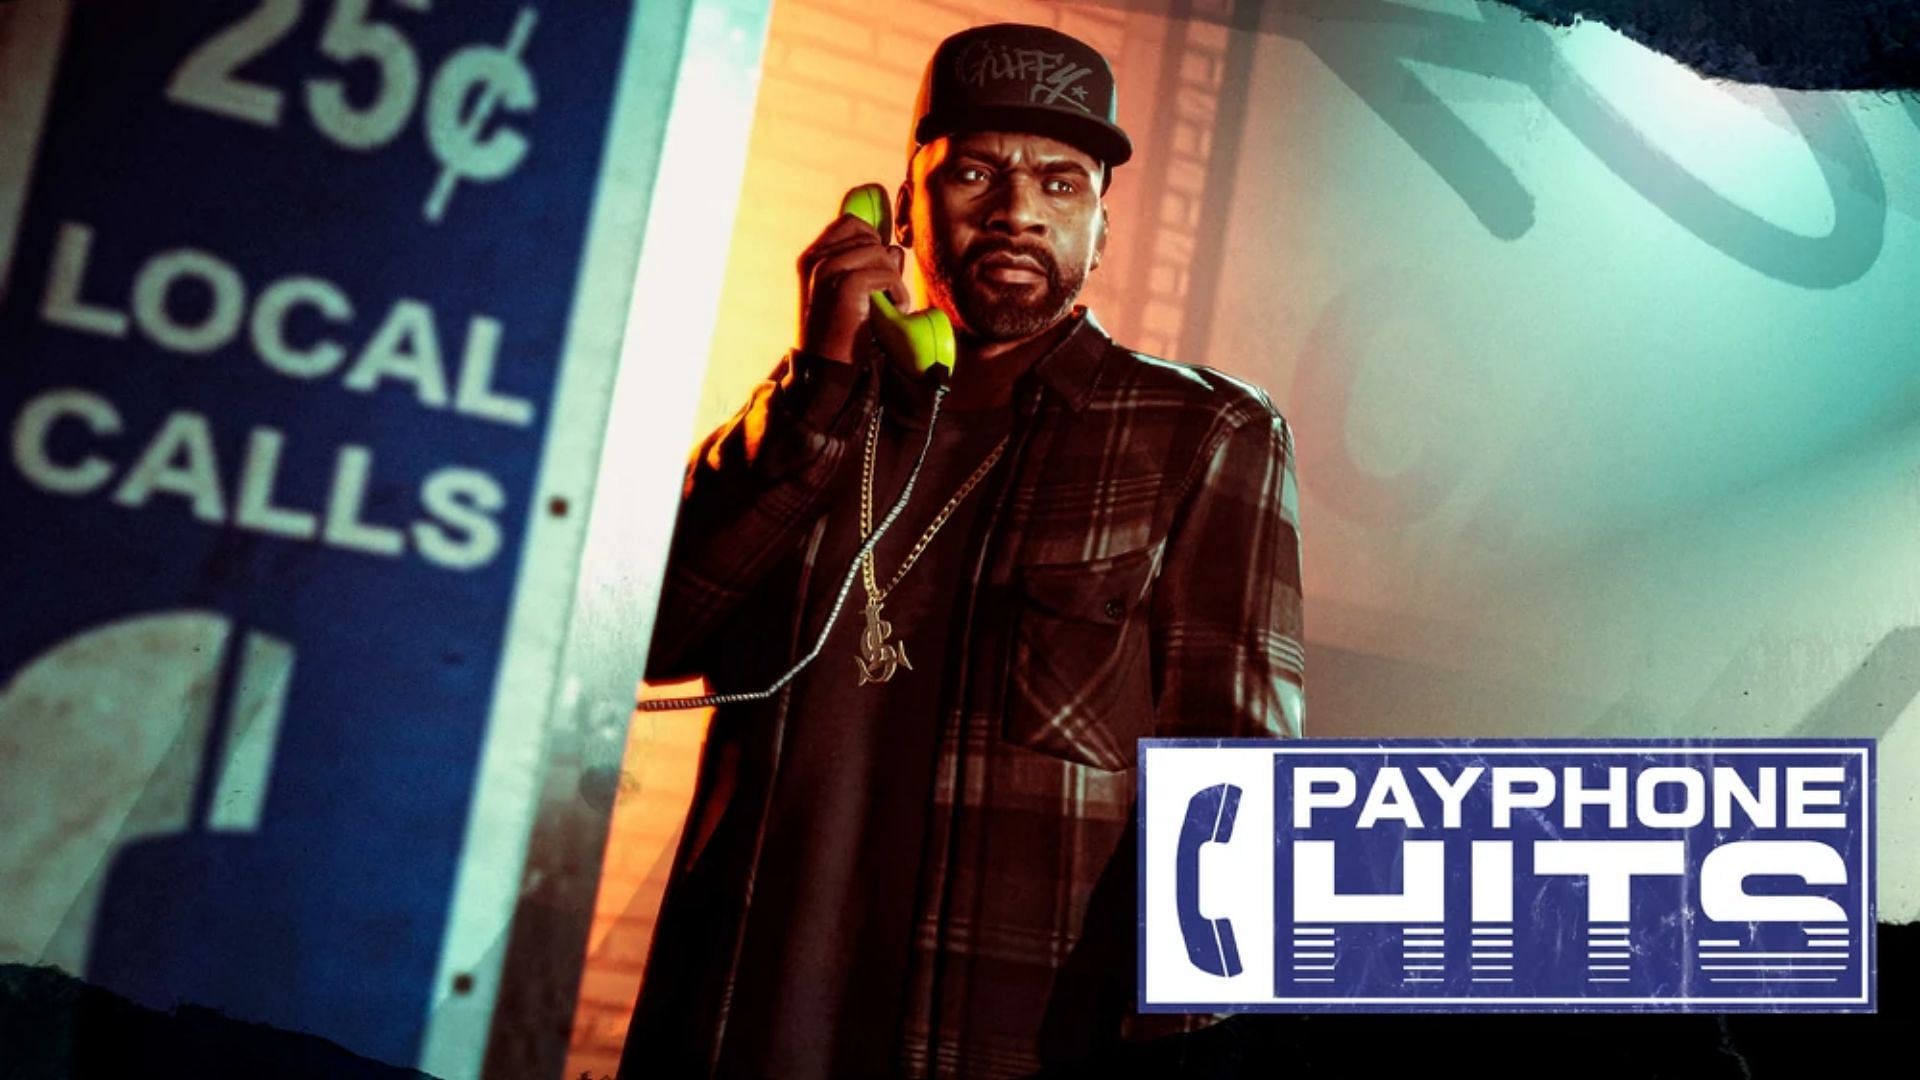 The official poster for the Payphone Hits missions in Grand Theft Auto Online (Image via Rockstar Games)